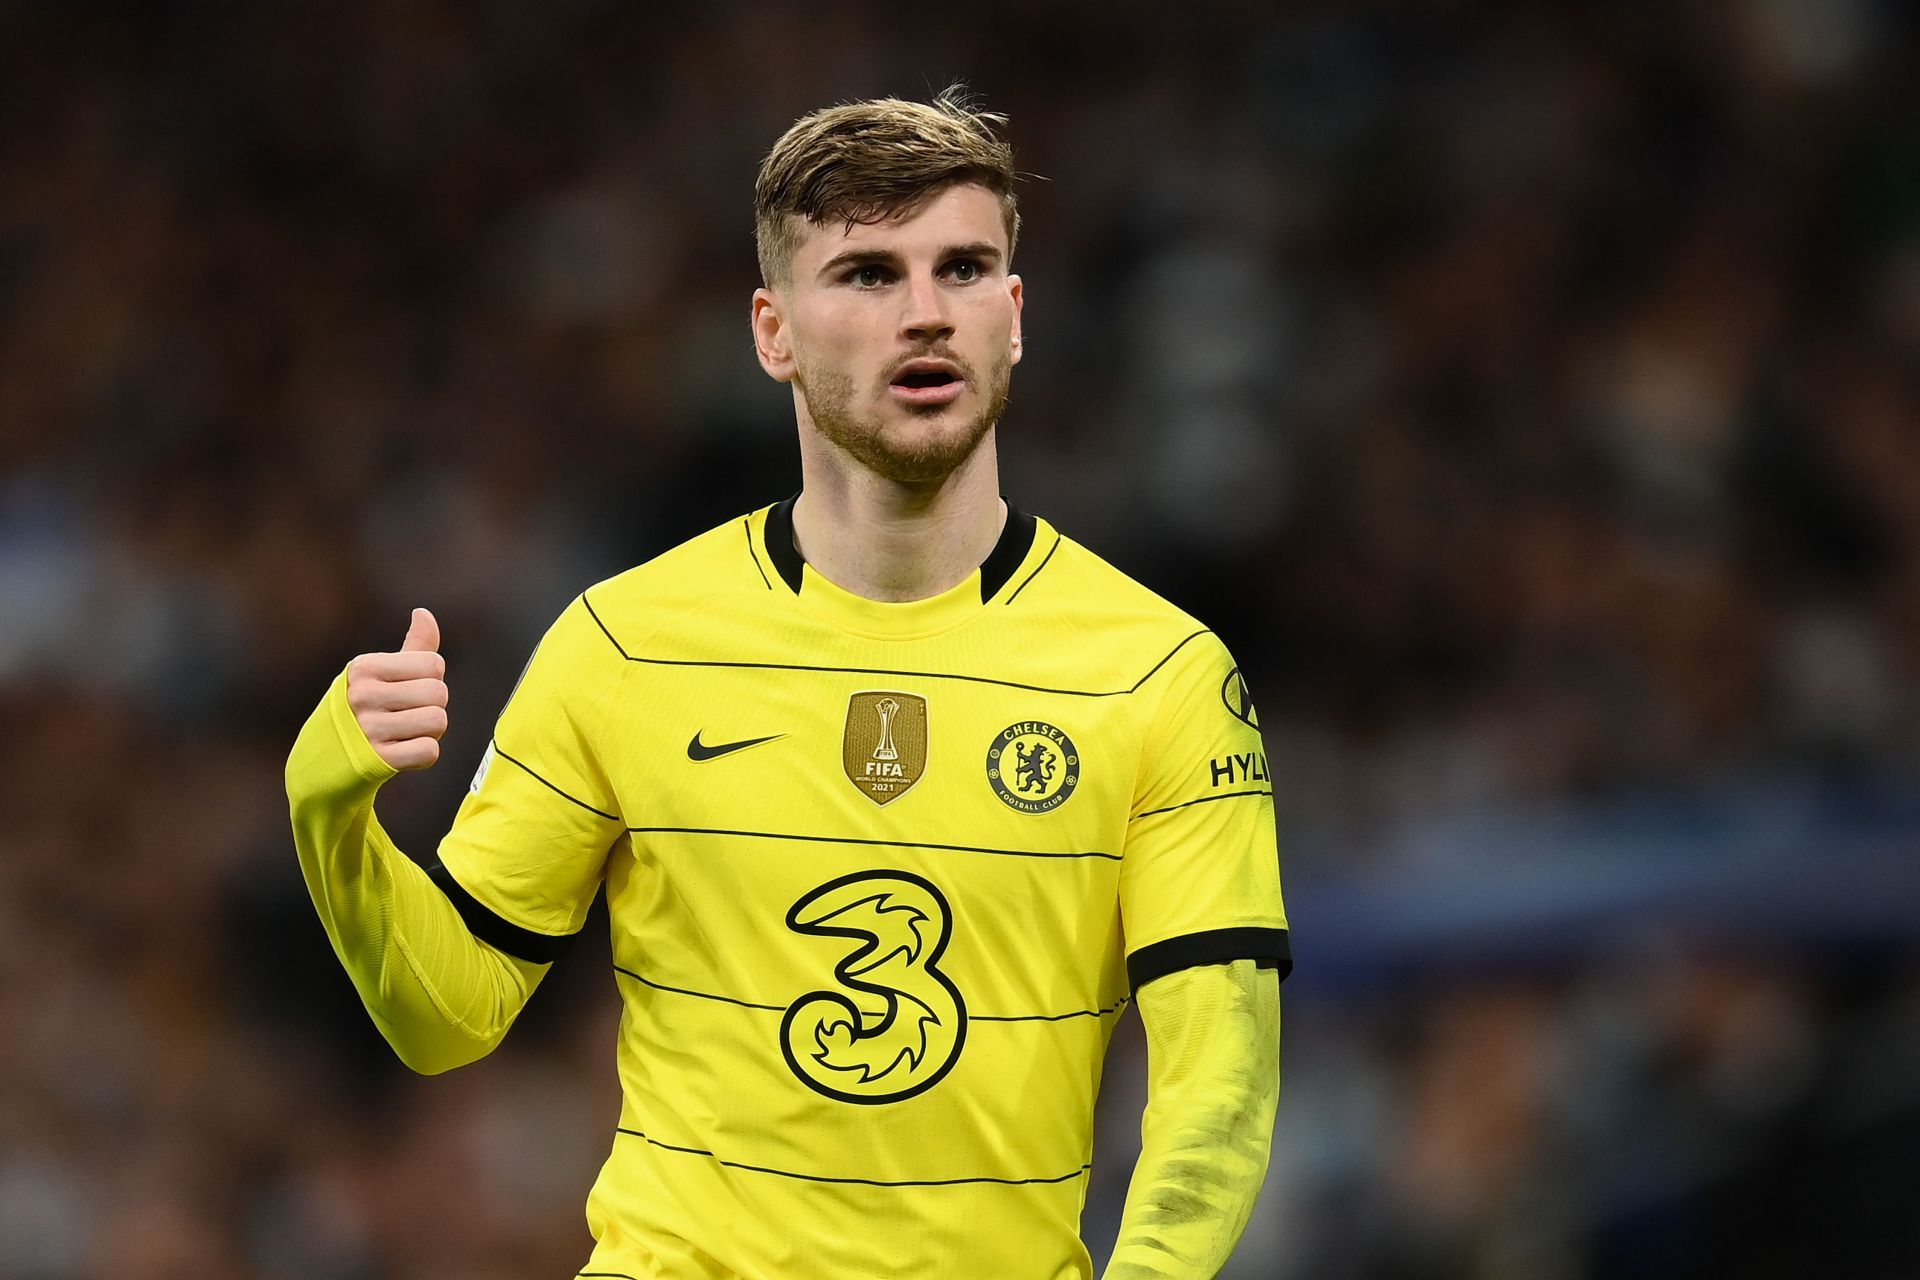 Werner had 17 goal contributions for Chelsea last season